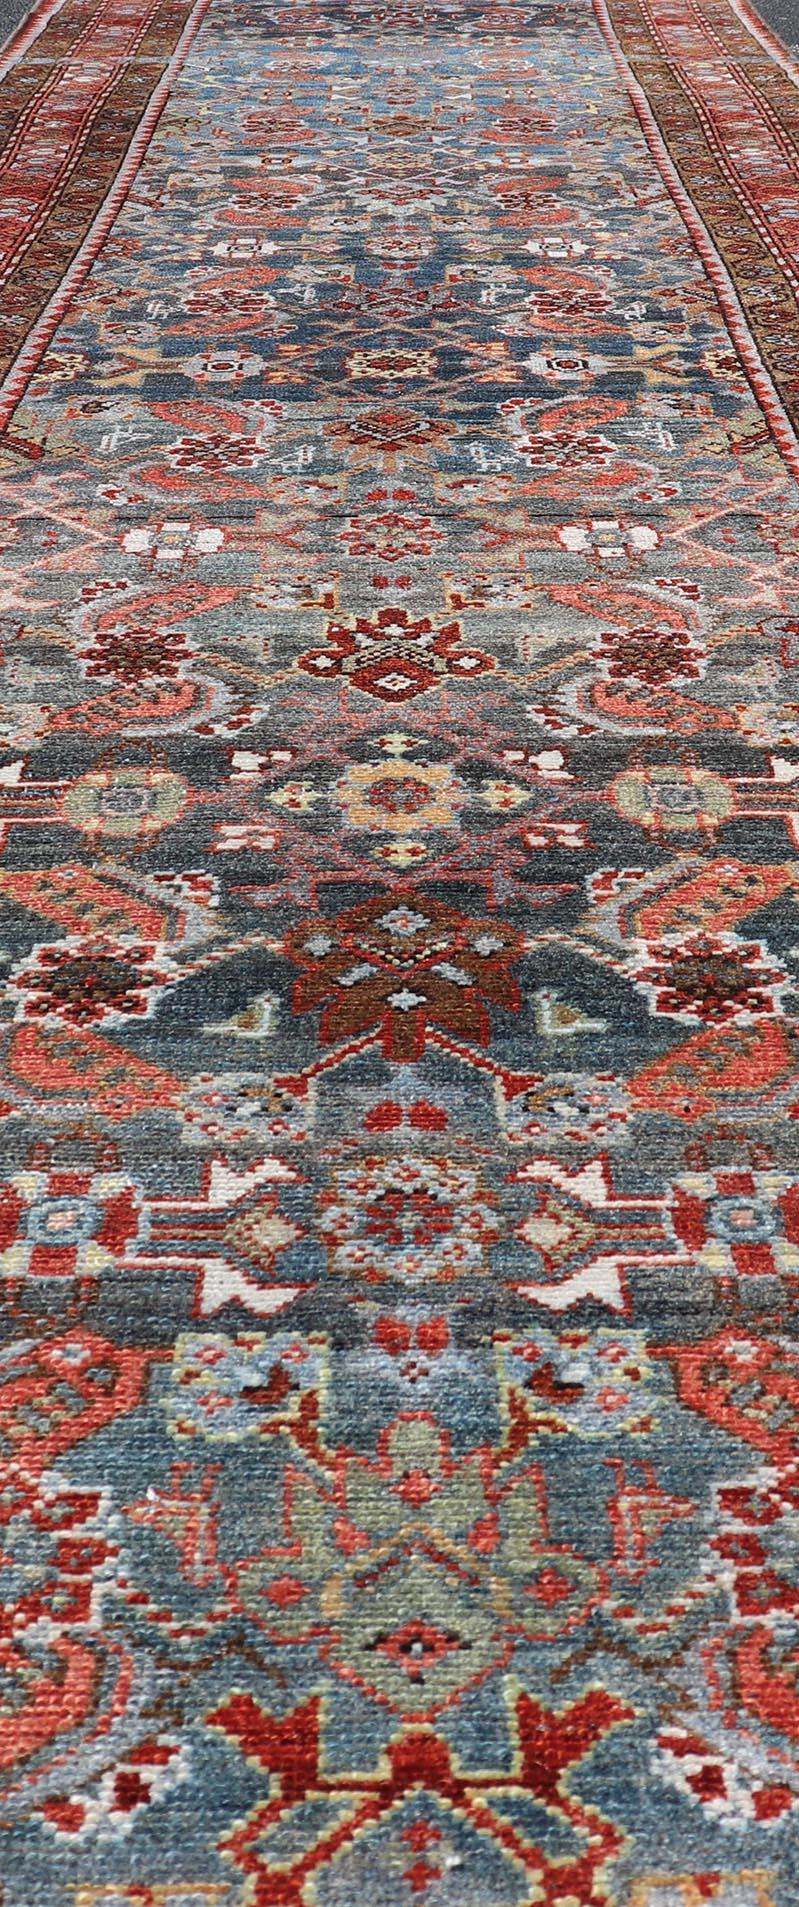 N.W. Persian Antique Runner with Geometric Florals Set on a Blue Field For Sale 1